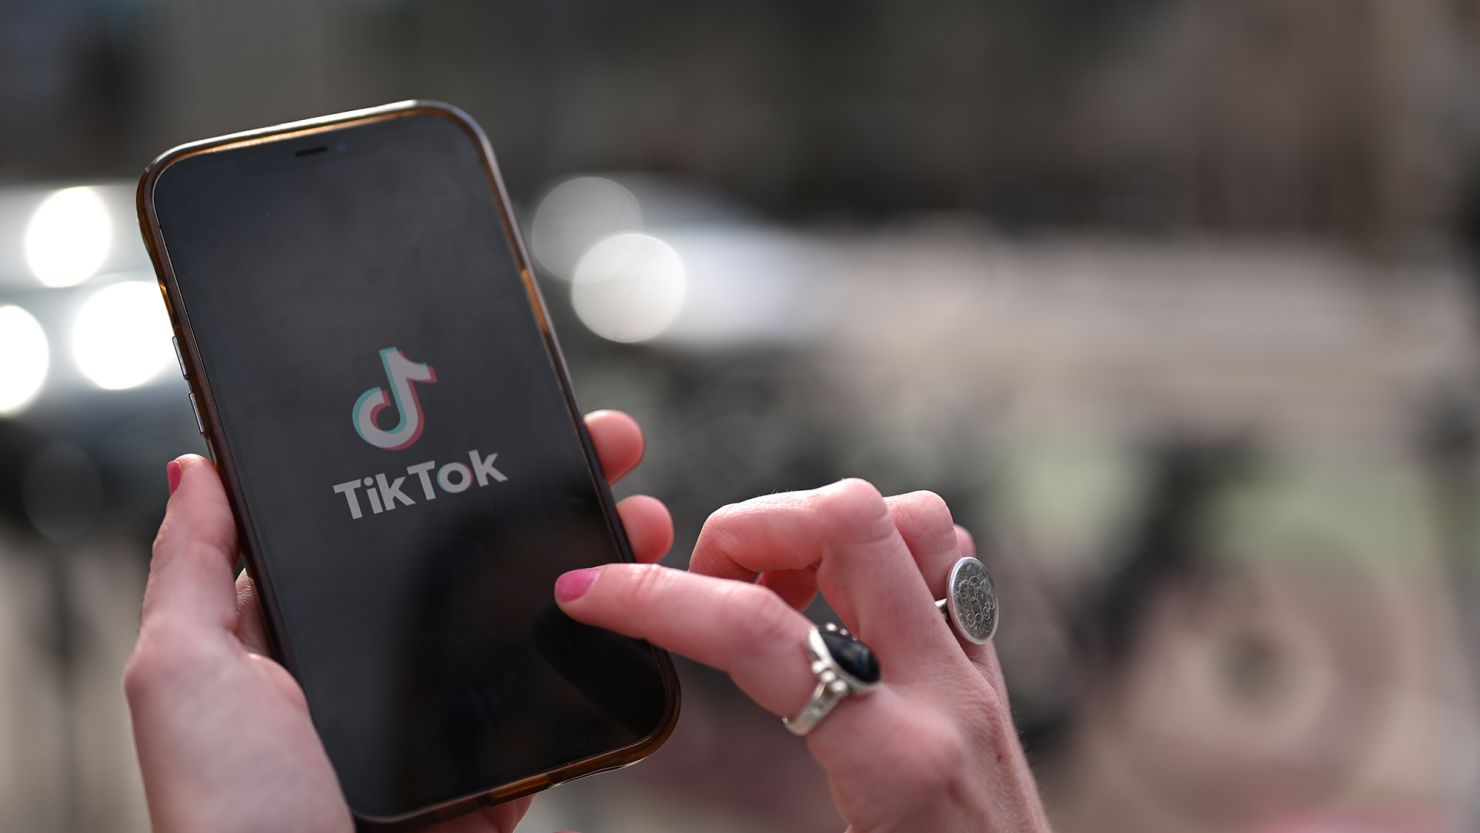 “At the stage that the bill is signed [by President Joe Biden], we will move to the courts for a legal challenge,” TikTok's head of public policy for the Americas wrote in a memo to employees Saturday.